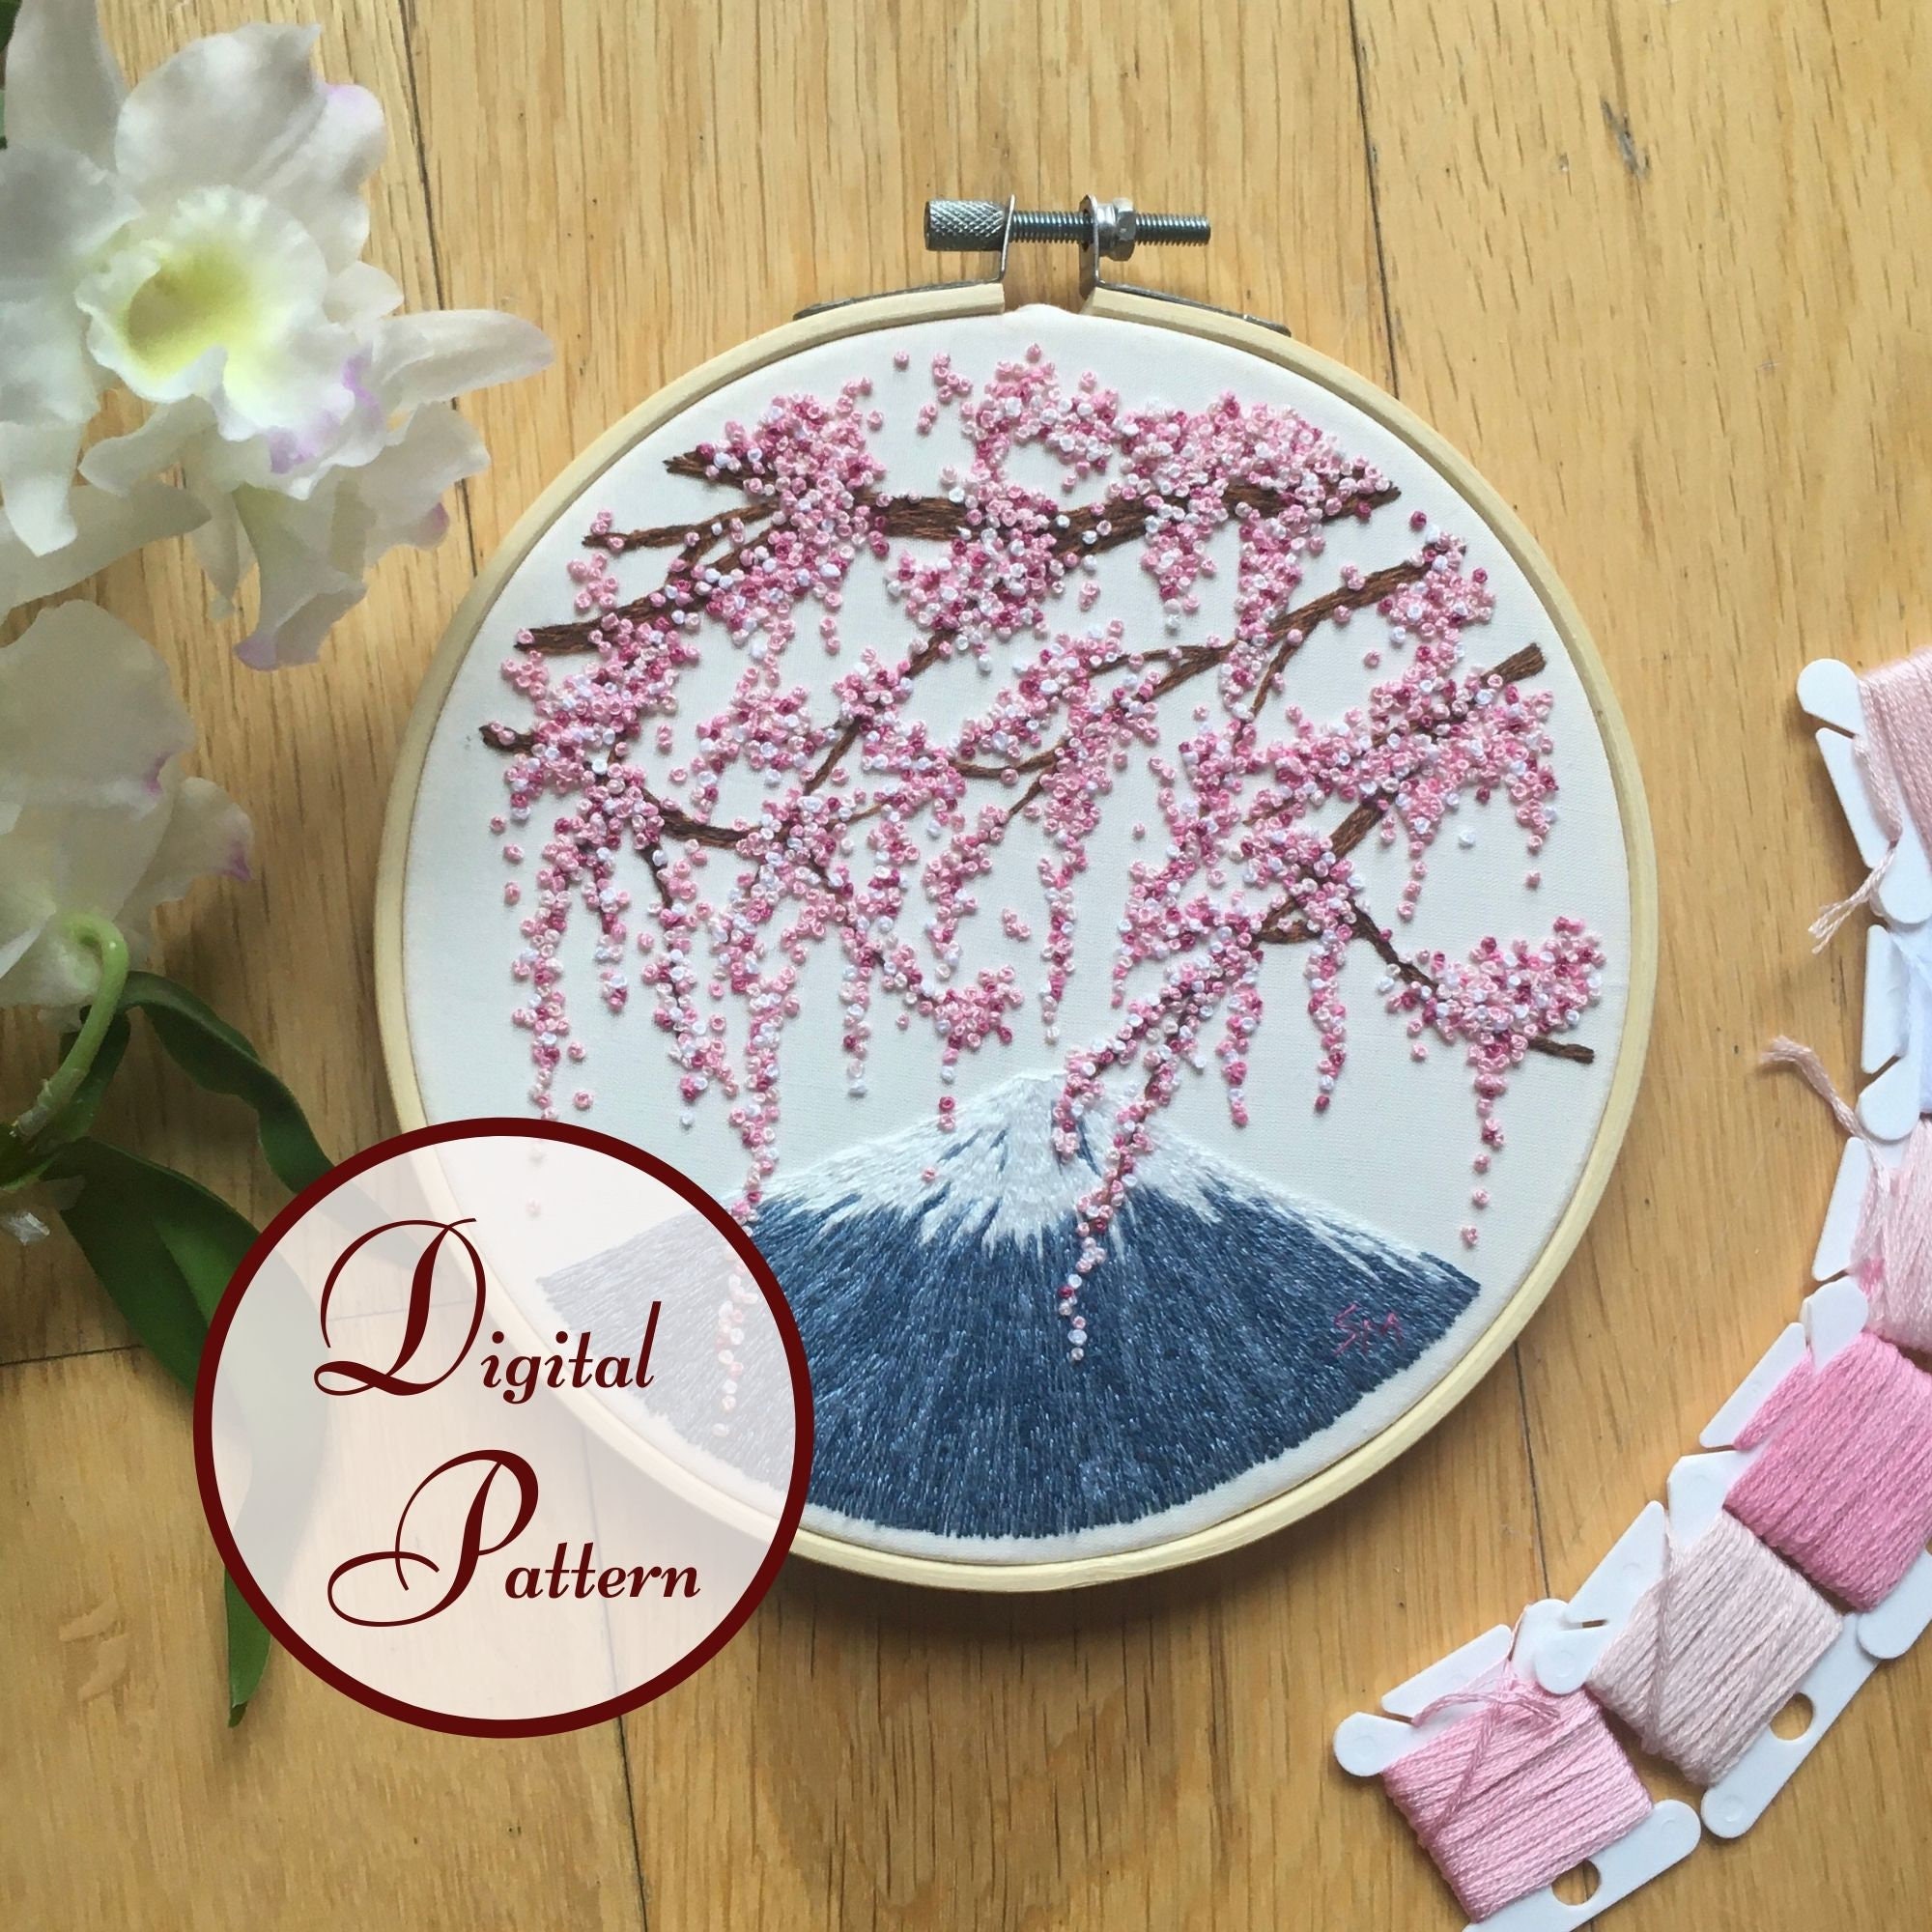 Blossom Tree Embroidery Kit Kits & How To Sewing & Needlecraft Craft ...